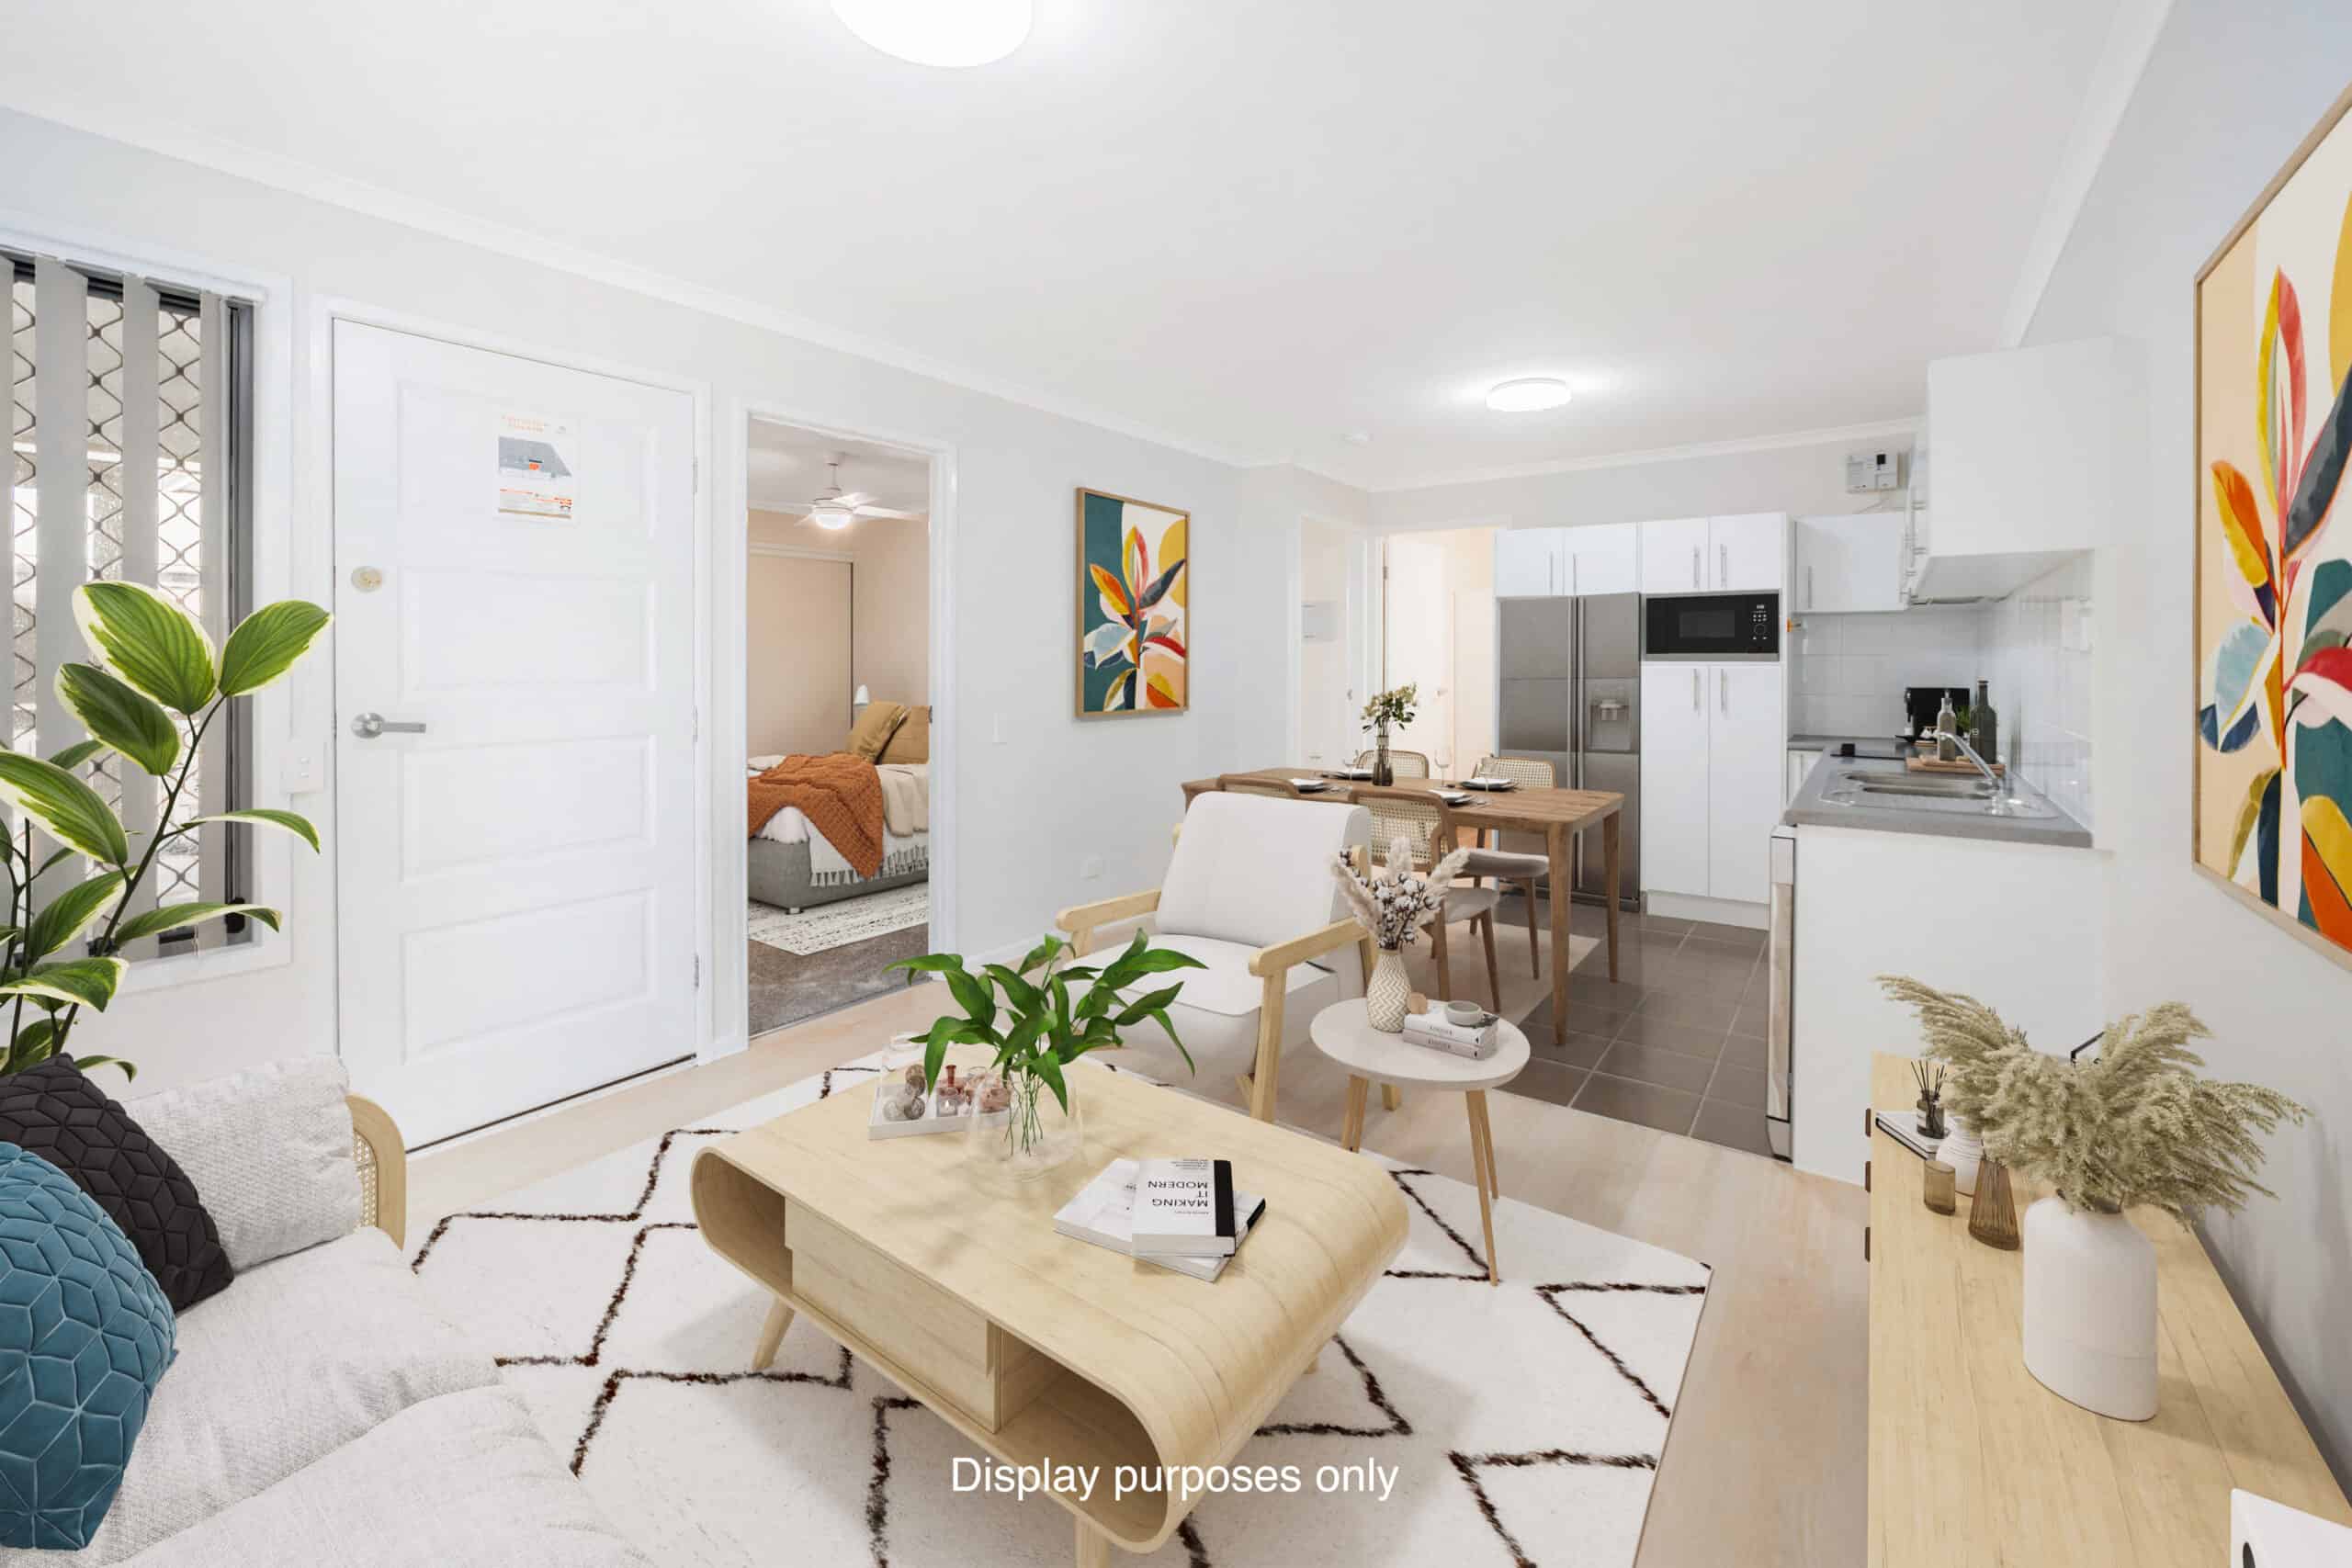 Open plan kitchen, dining, living area in on of our Oak Tree Goodna properties.